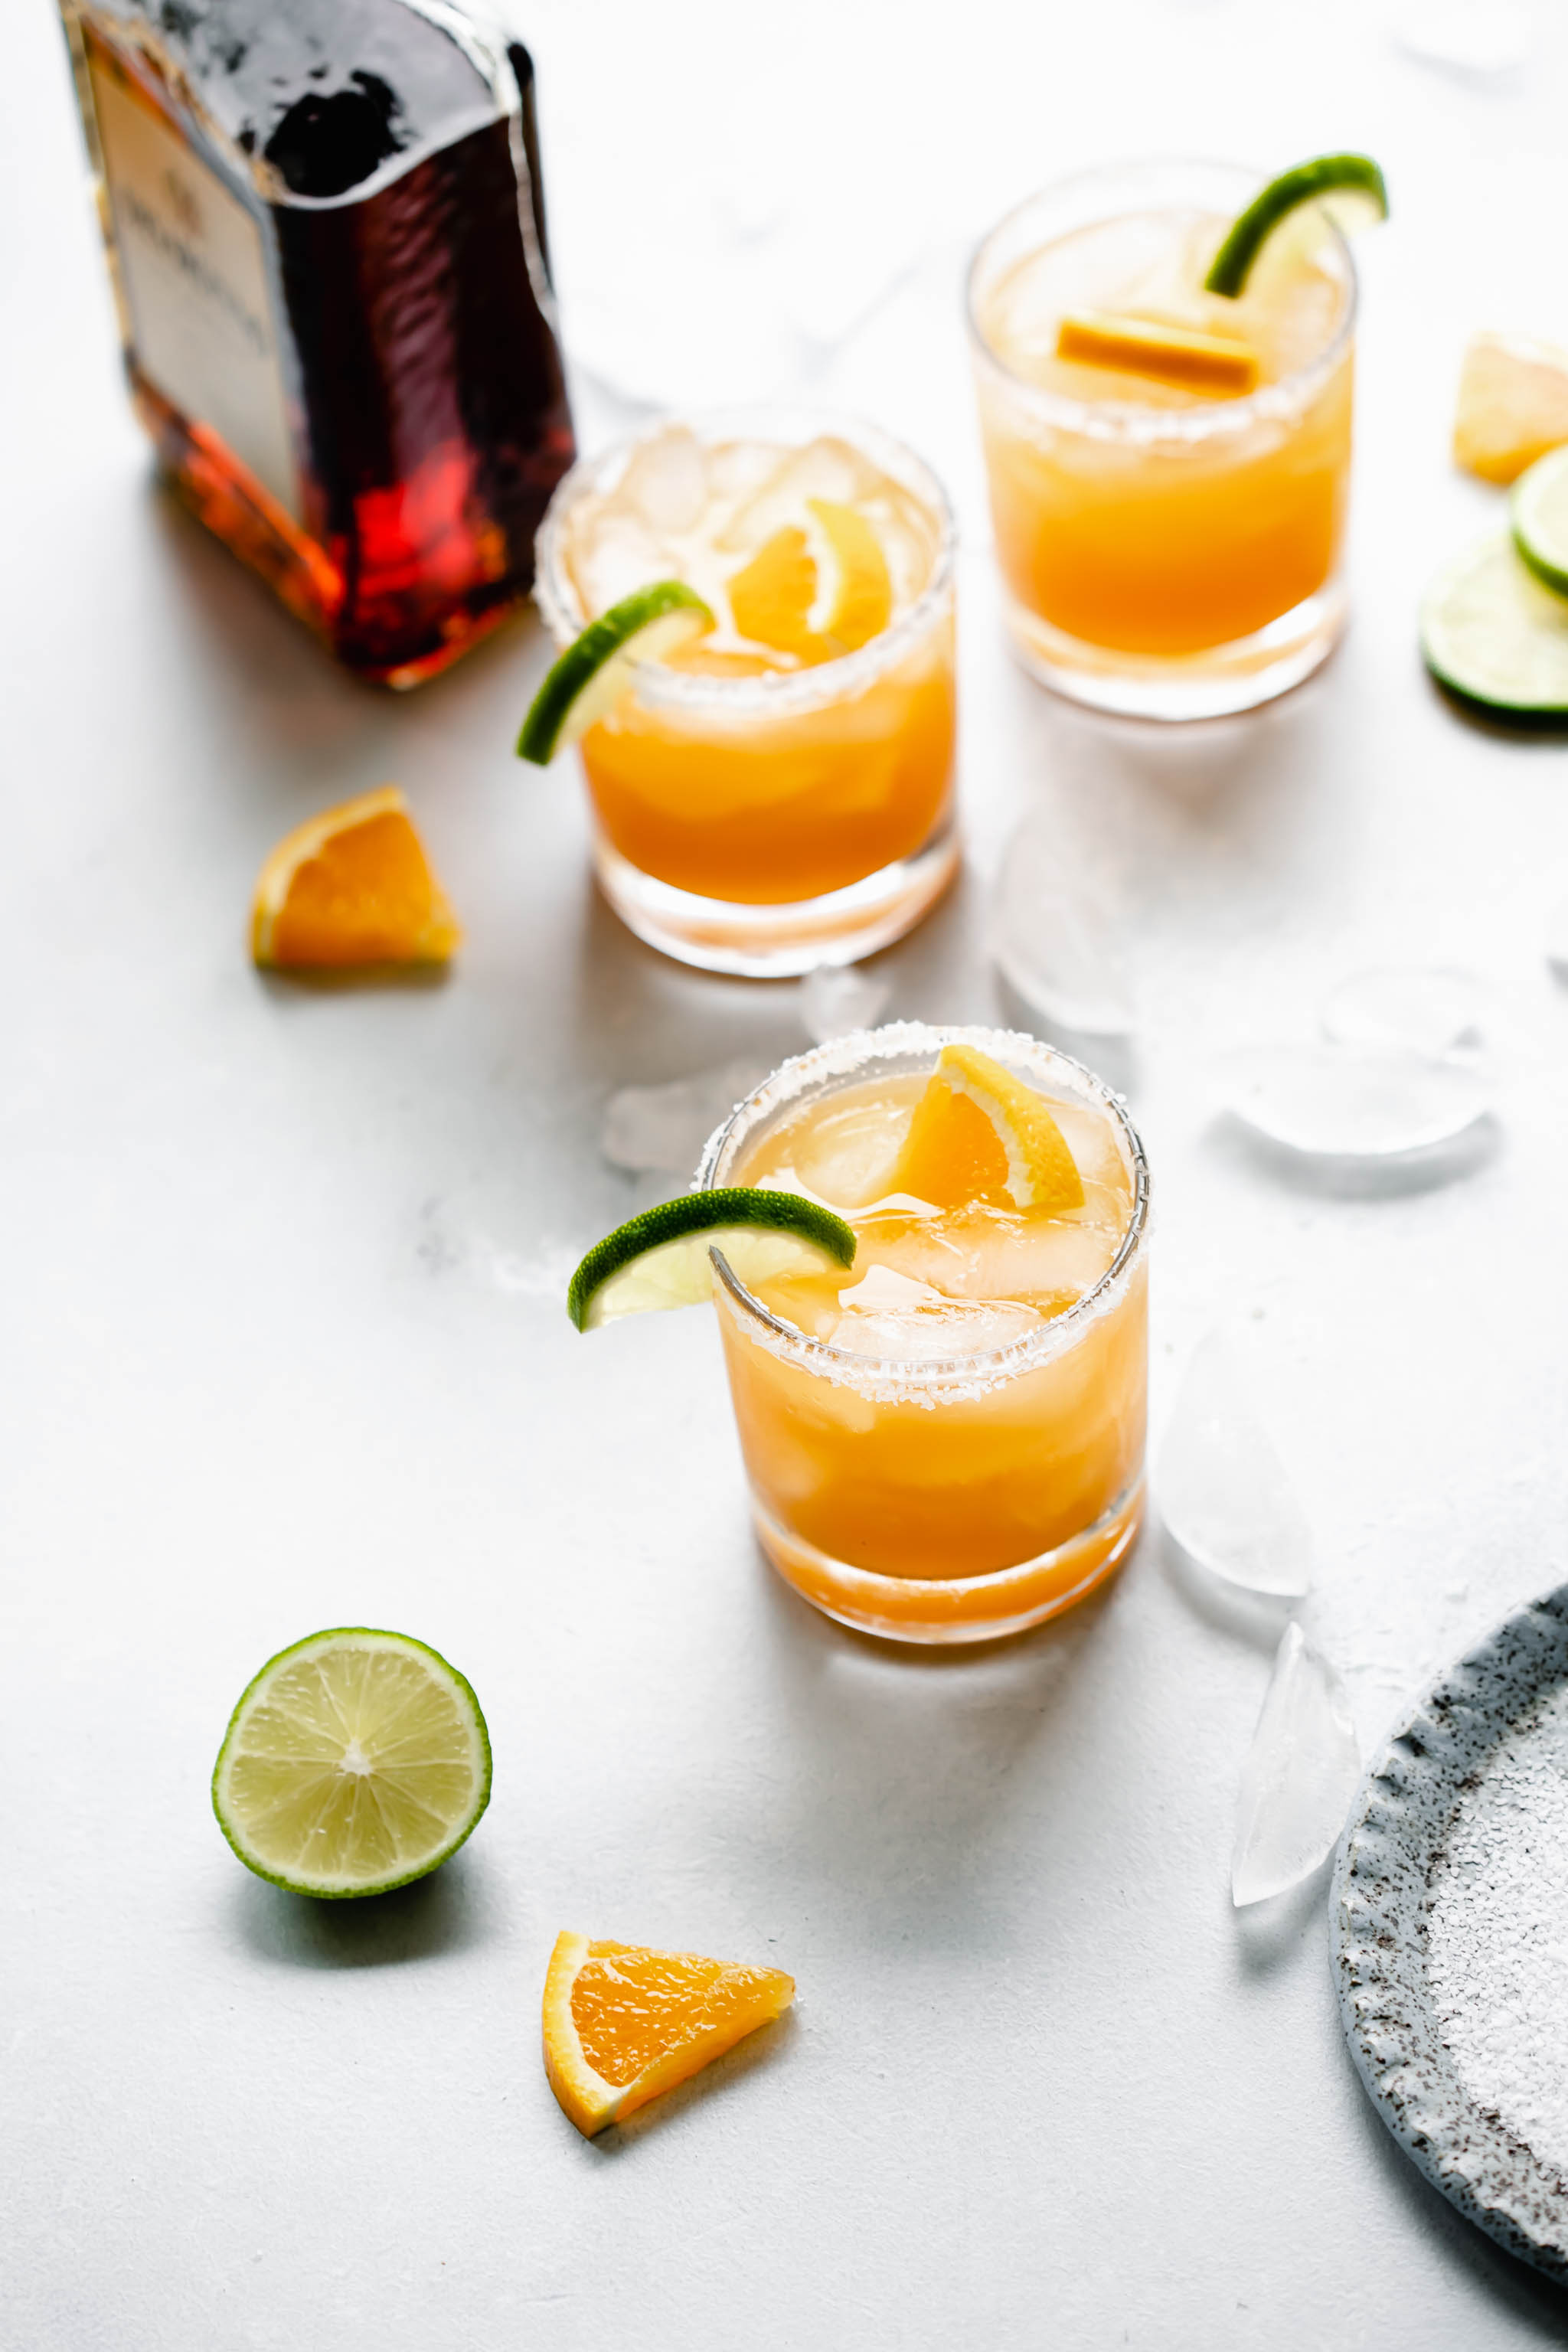 Three glasses of Italian Margarita rimmed with salt and garnished with orange and lime slices next to bottle of amaretto liqueur.